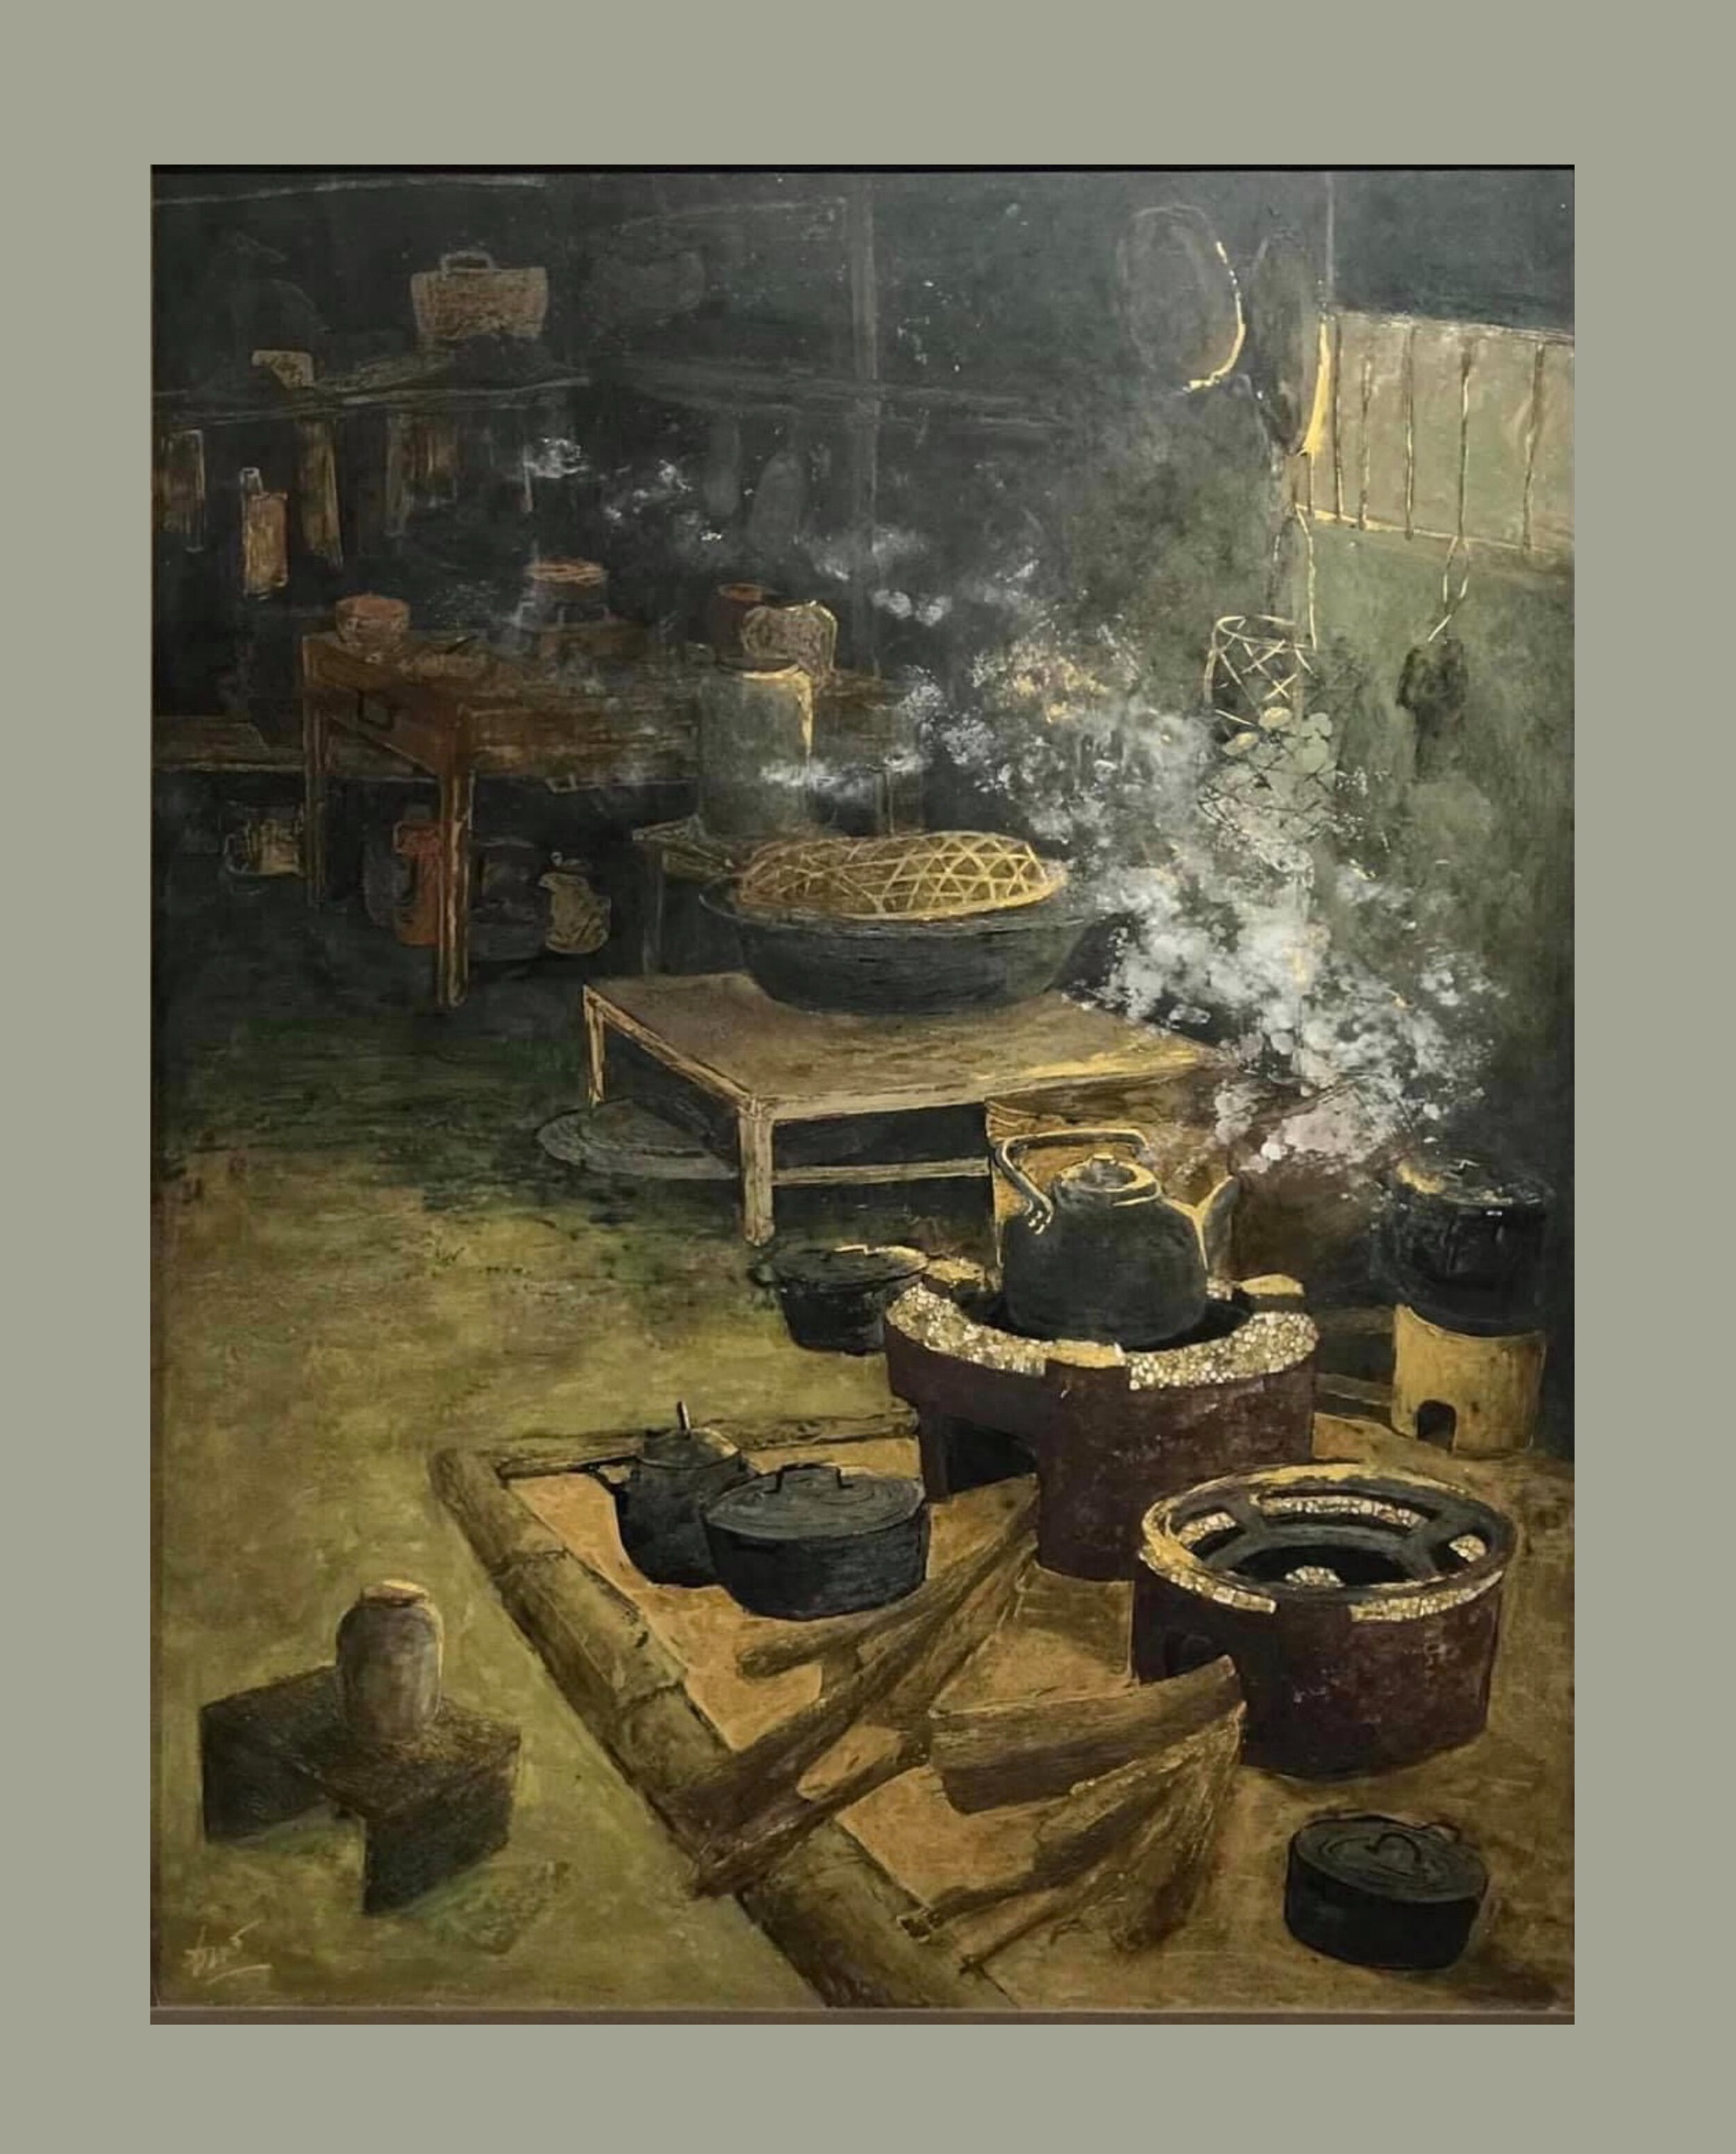 The kitchen of the Nung people.jpeg